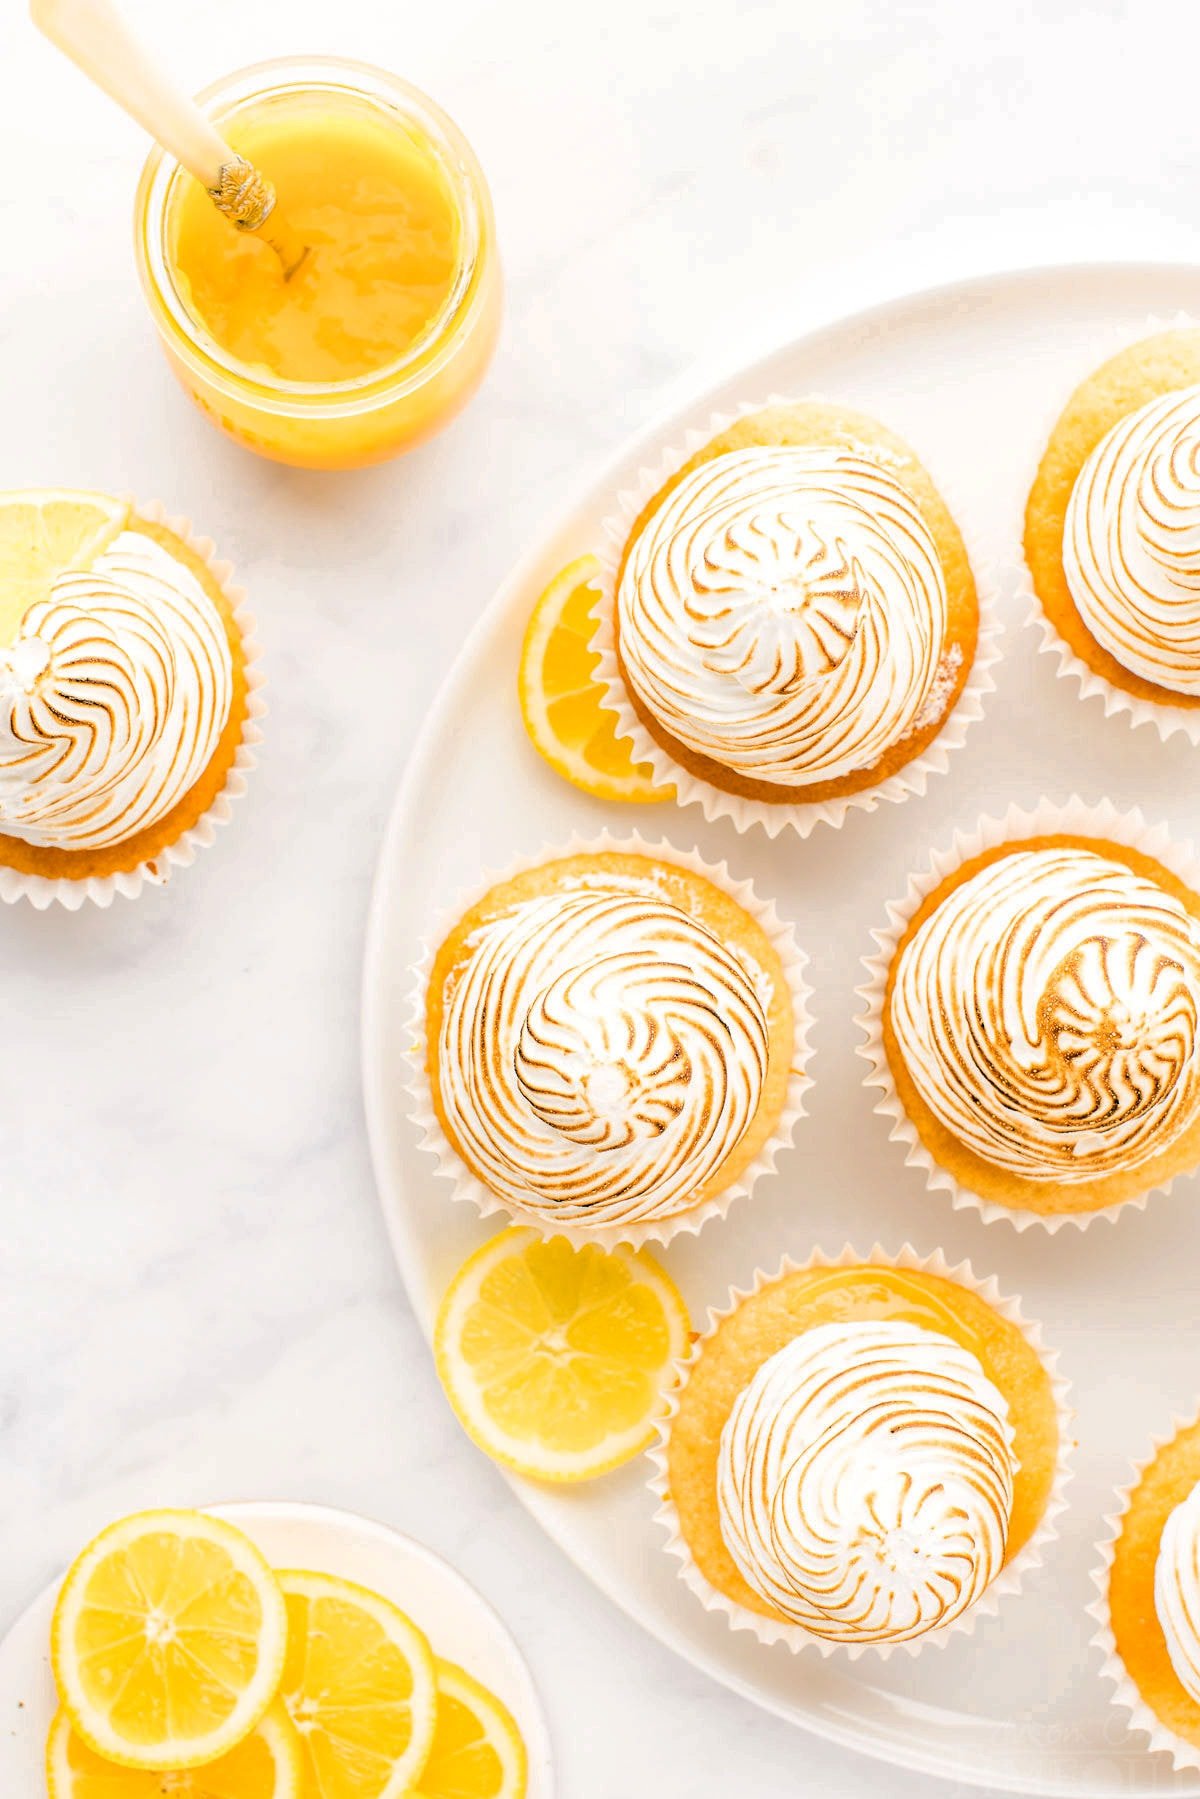 white plate with six lemon meringue cupcakes on it as well as a bowl of lemons cut into wedges.